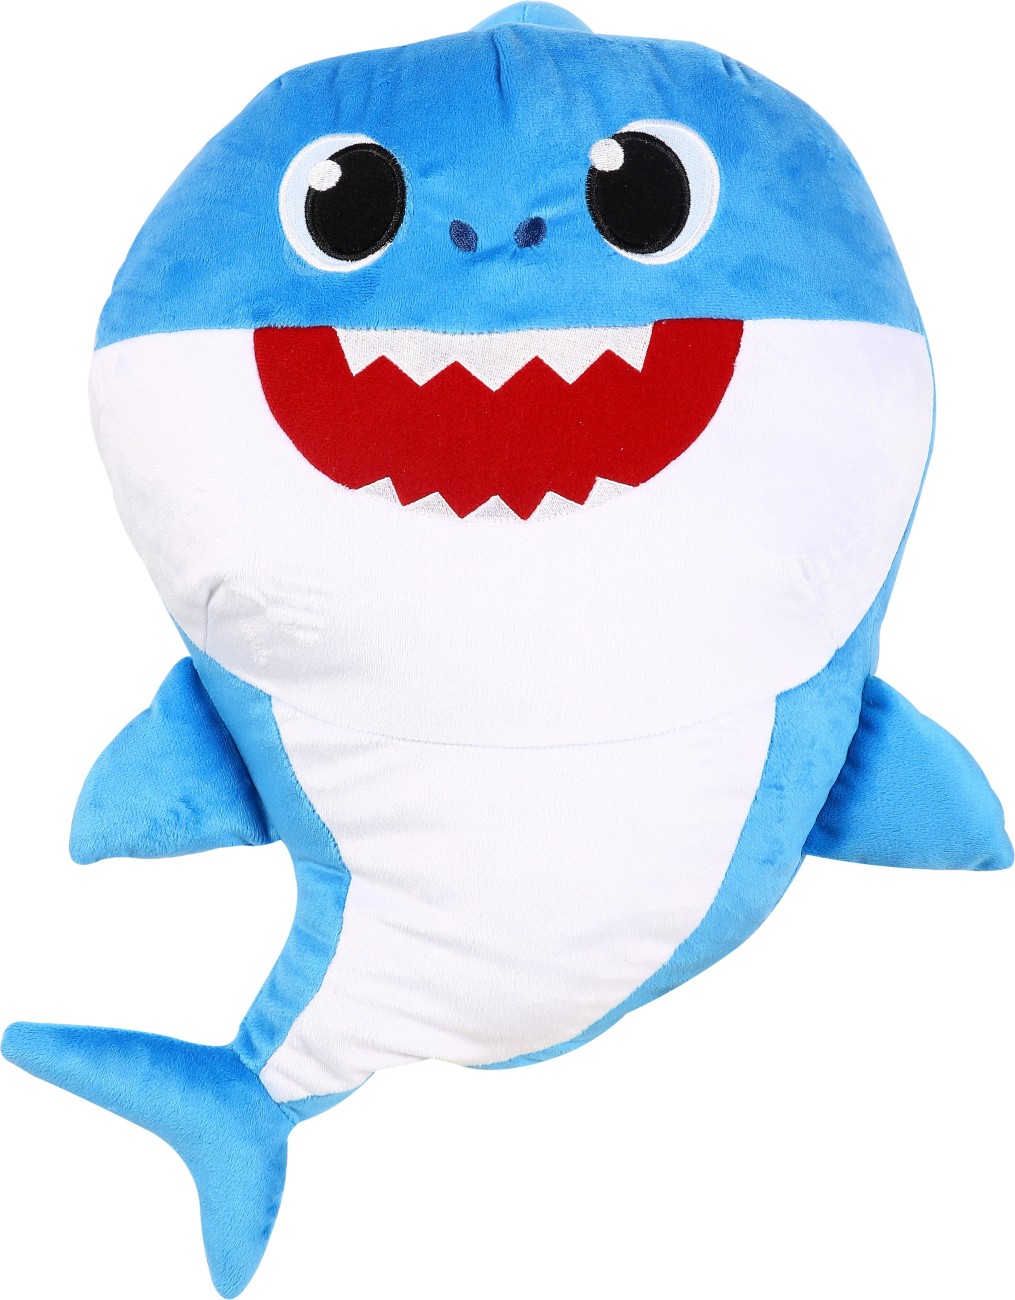 Pinkfong Baby Shark BS60010 - 45.7 cm - BS60010 . Buy Shark toys in India.  shop for Pinkfong Baby Shark products in India.